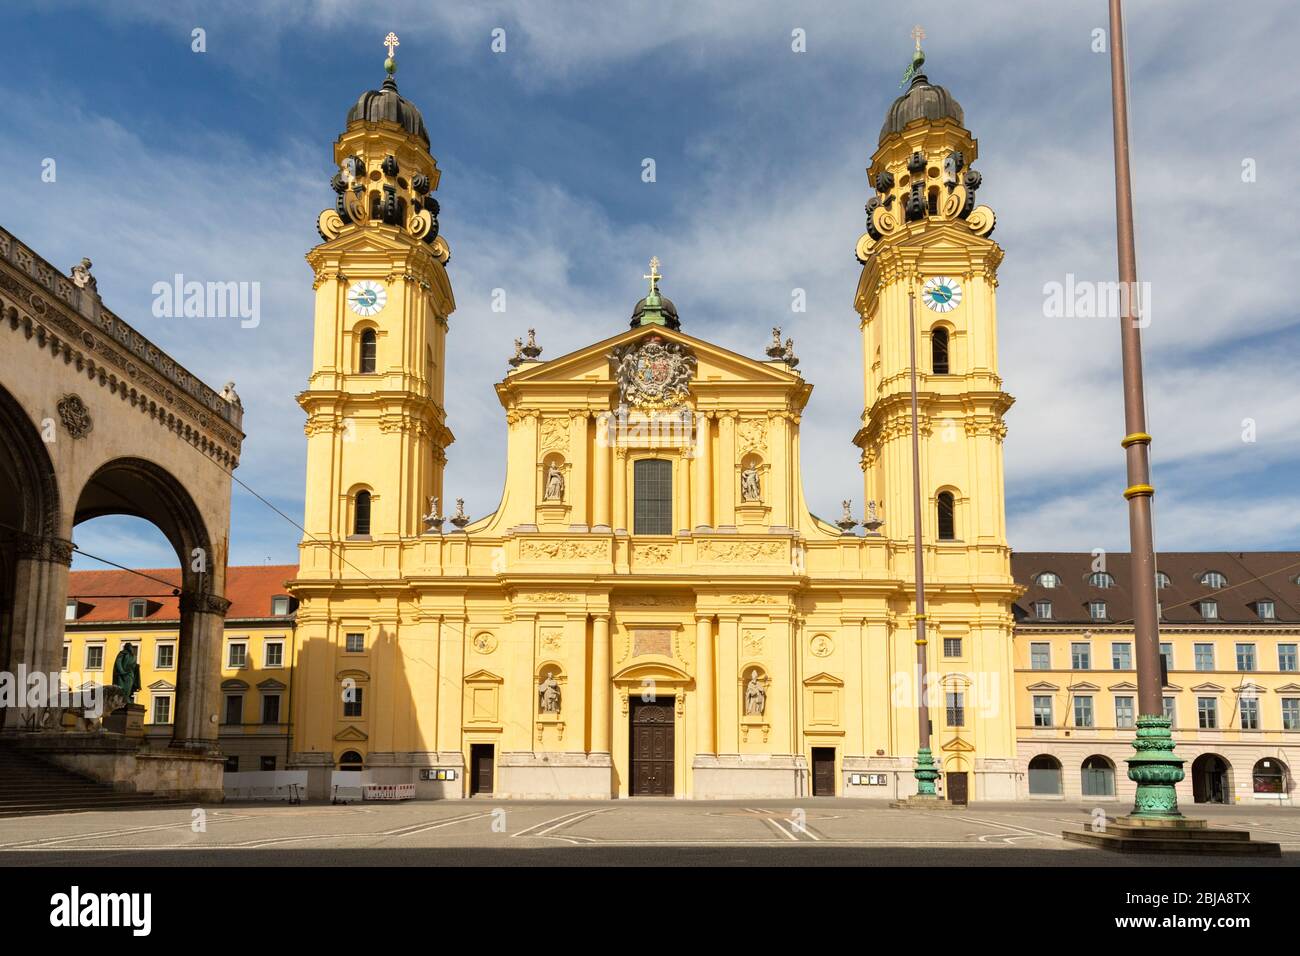 Front view of Theatinerkirche (Theatine Church of St. Cajetan). Catholic church, inaugurated 1675. Baroque architecture. Famous church in Munich. Stock Photo